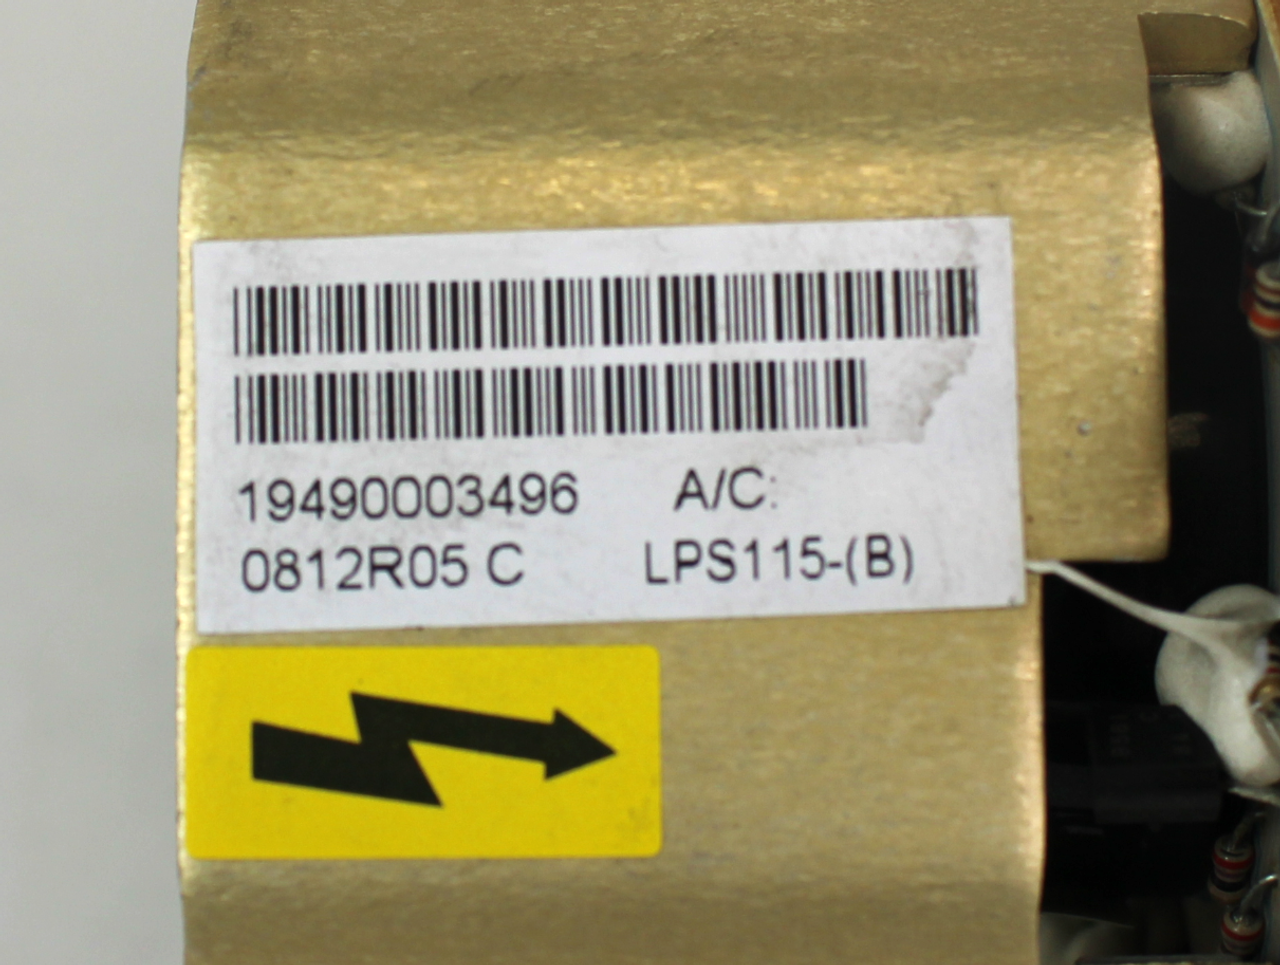 Astec LPS115, 19490003496 Power Supply